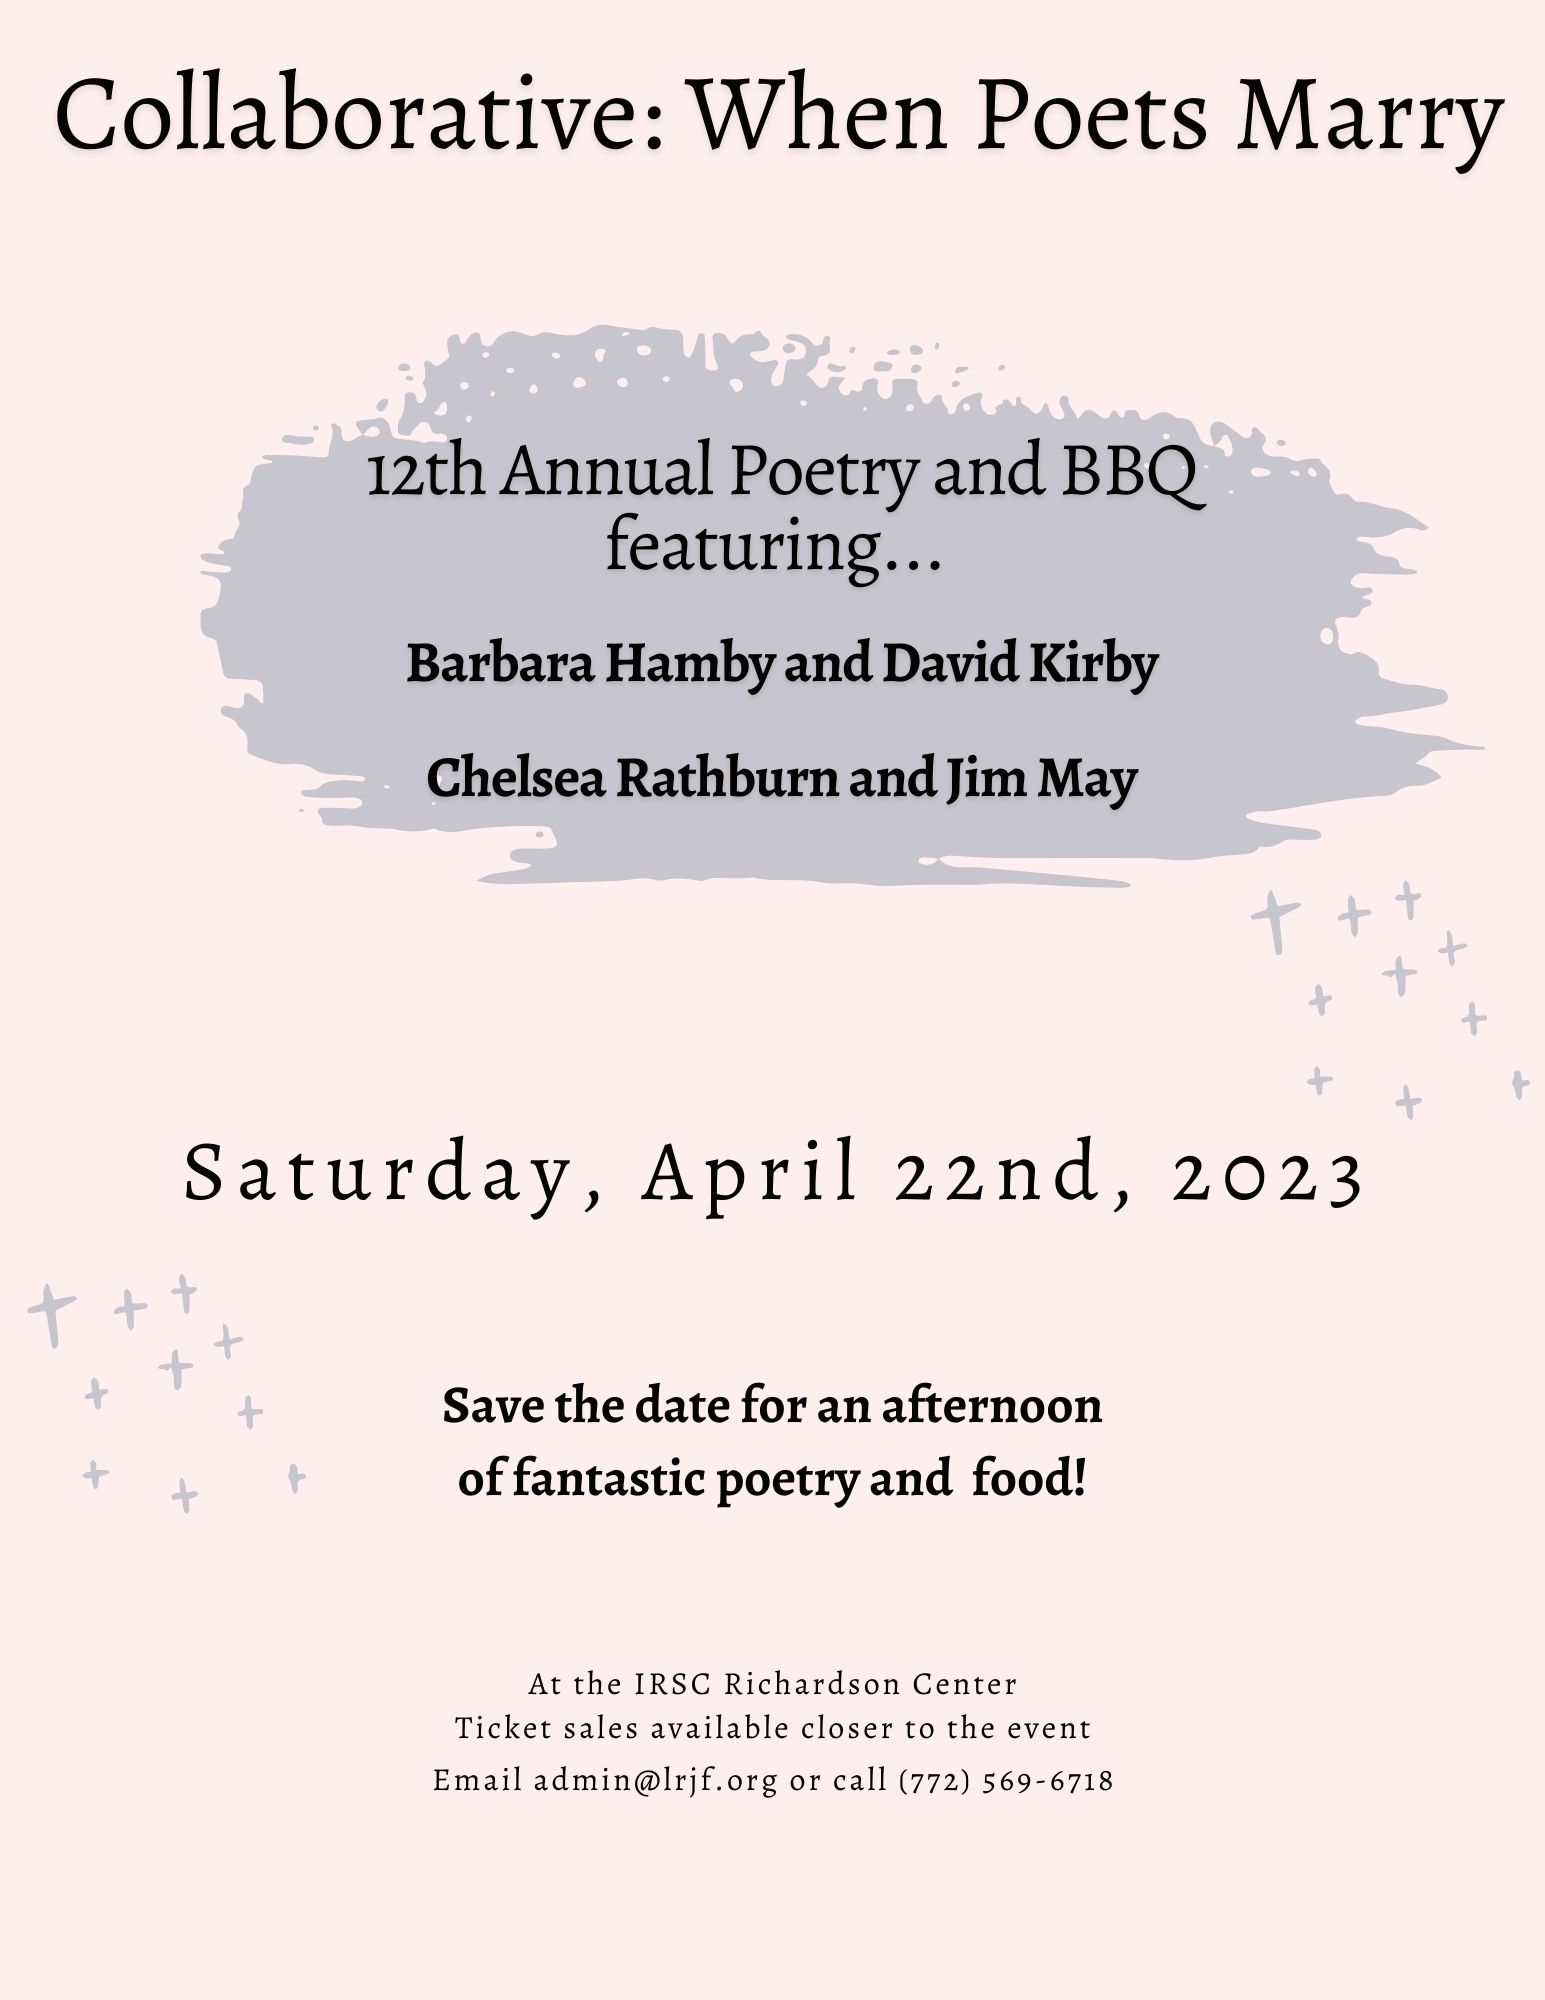 12th Annual Poetry and BBQ